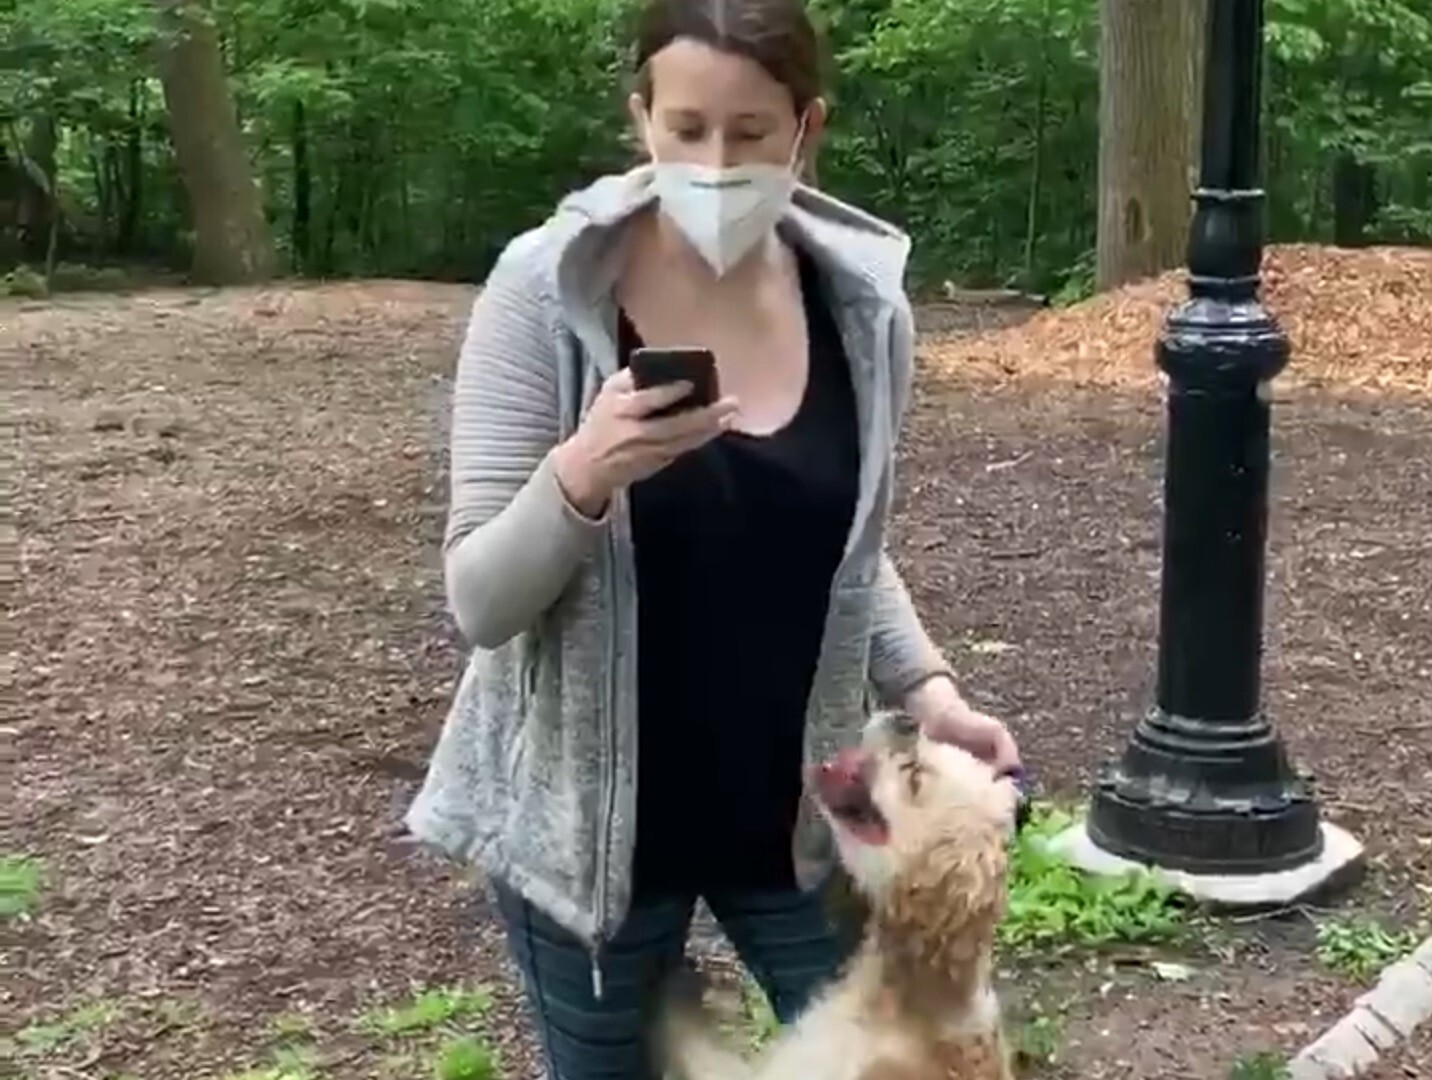 A screen grab from a viral video of the confrontation between Amy Cooper and Christian Cooper (no relation) in New York’s Central Park. She stated that she wasn’t racist in her public apology after the incident.